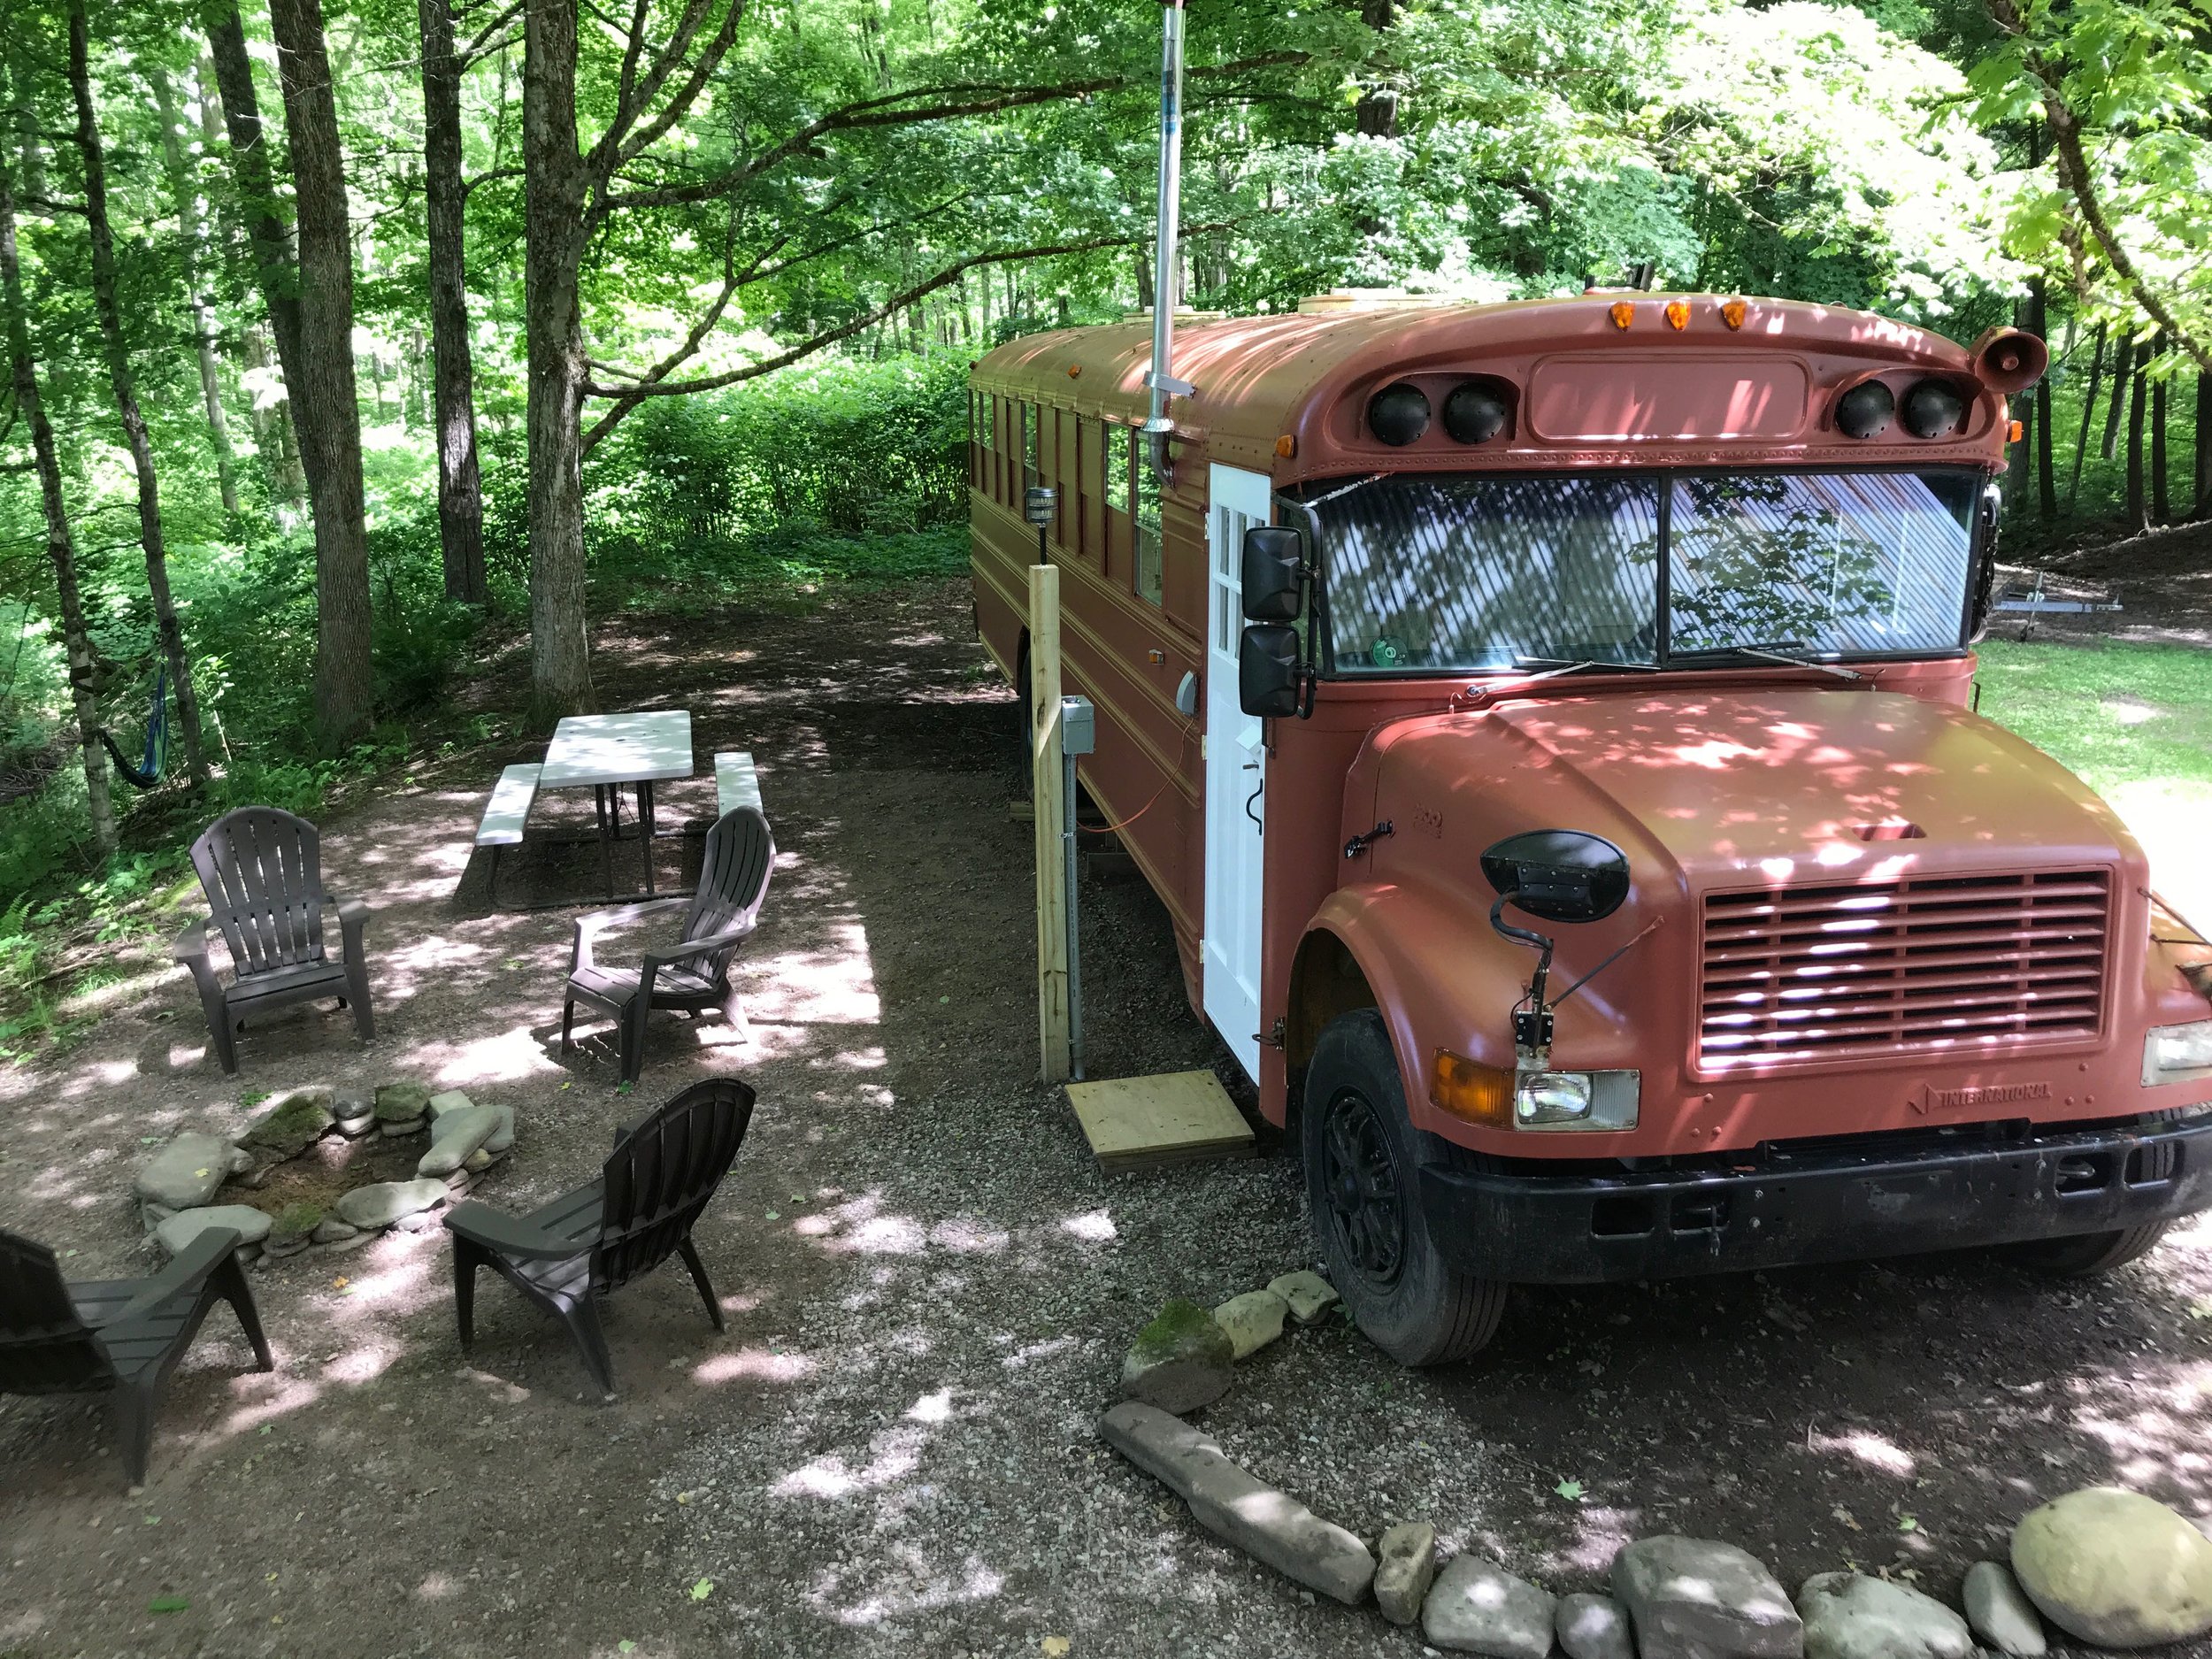 The Happy Camper Bus A Cozy Tiny House Cabin Rental In Upstate Ny Wellnesste Cabin Rentals Wedding Venue In Ny,Eggplant Recipes